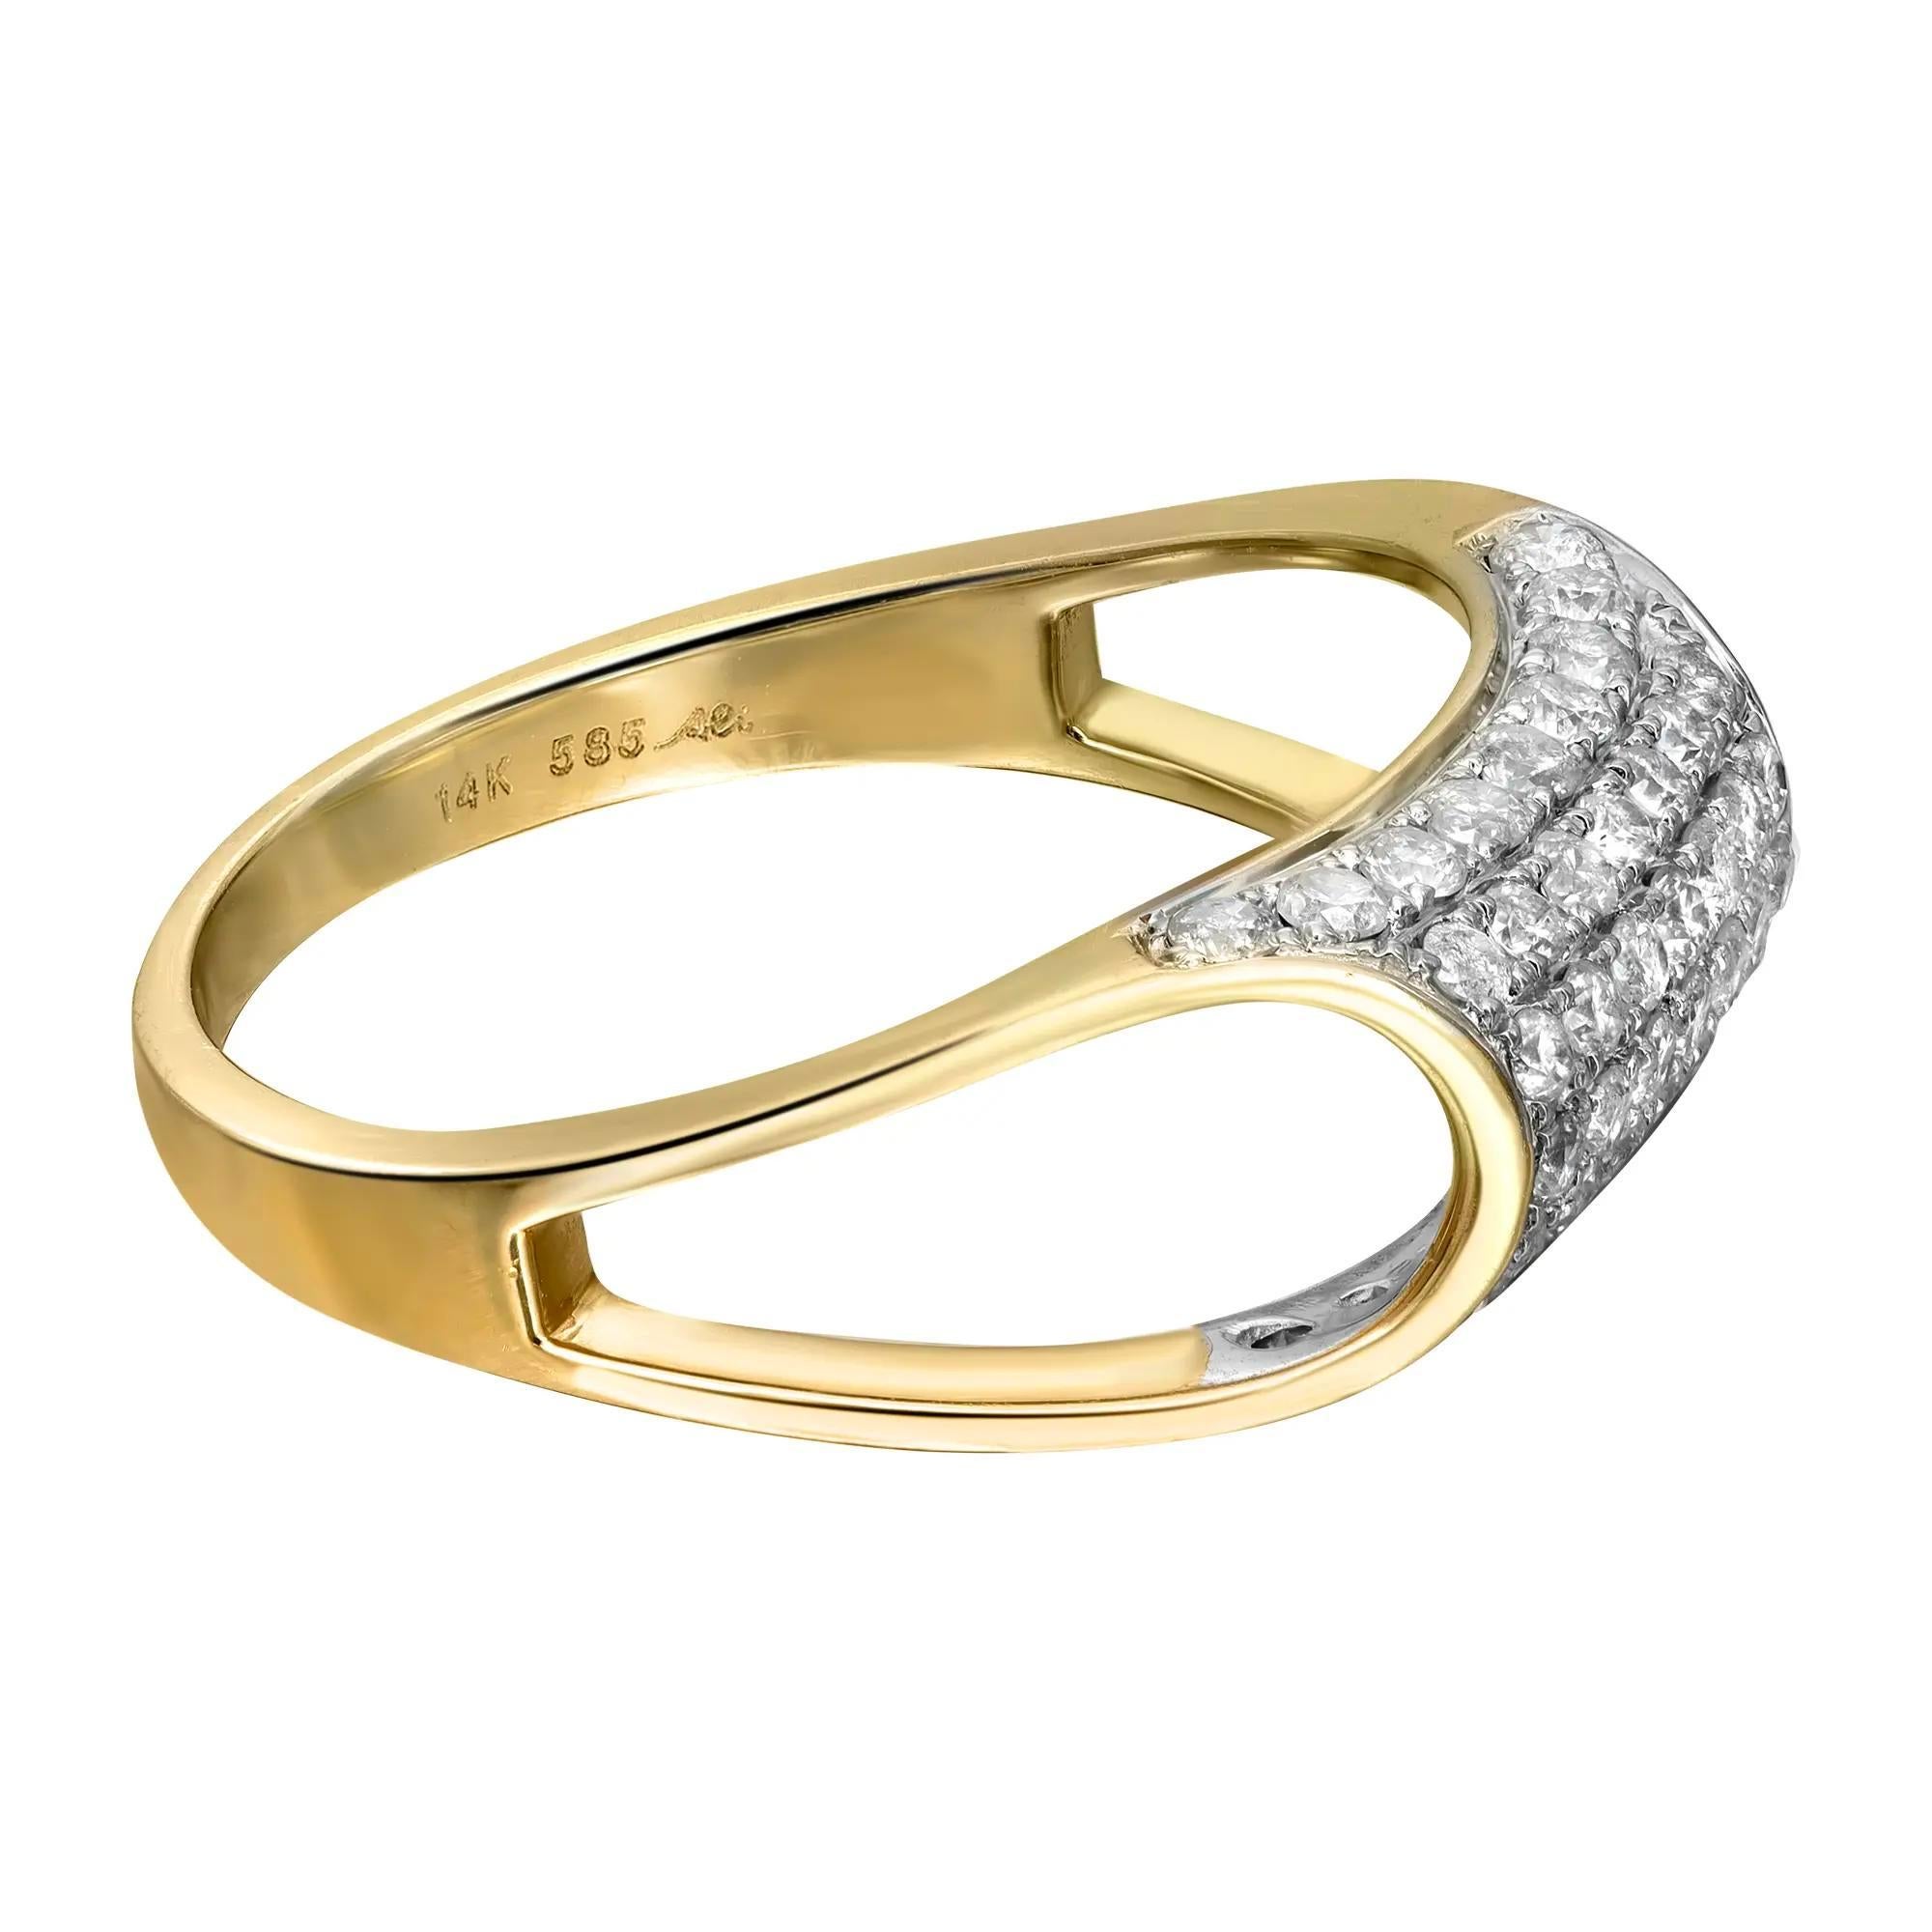 Classic and elegant diamond dome shaped band ring rendered in highly polished 14K yellow gold. This ring features round brilliant cut diamonds in pave setting totaling 0.60 carat. Diamond quality: I color and SI clarity. Ring size: 7.5. Ring width: